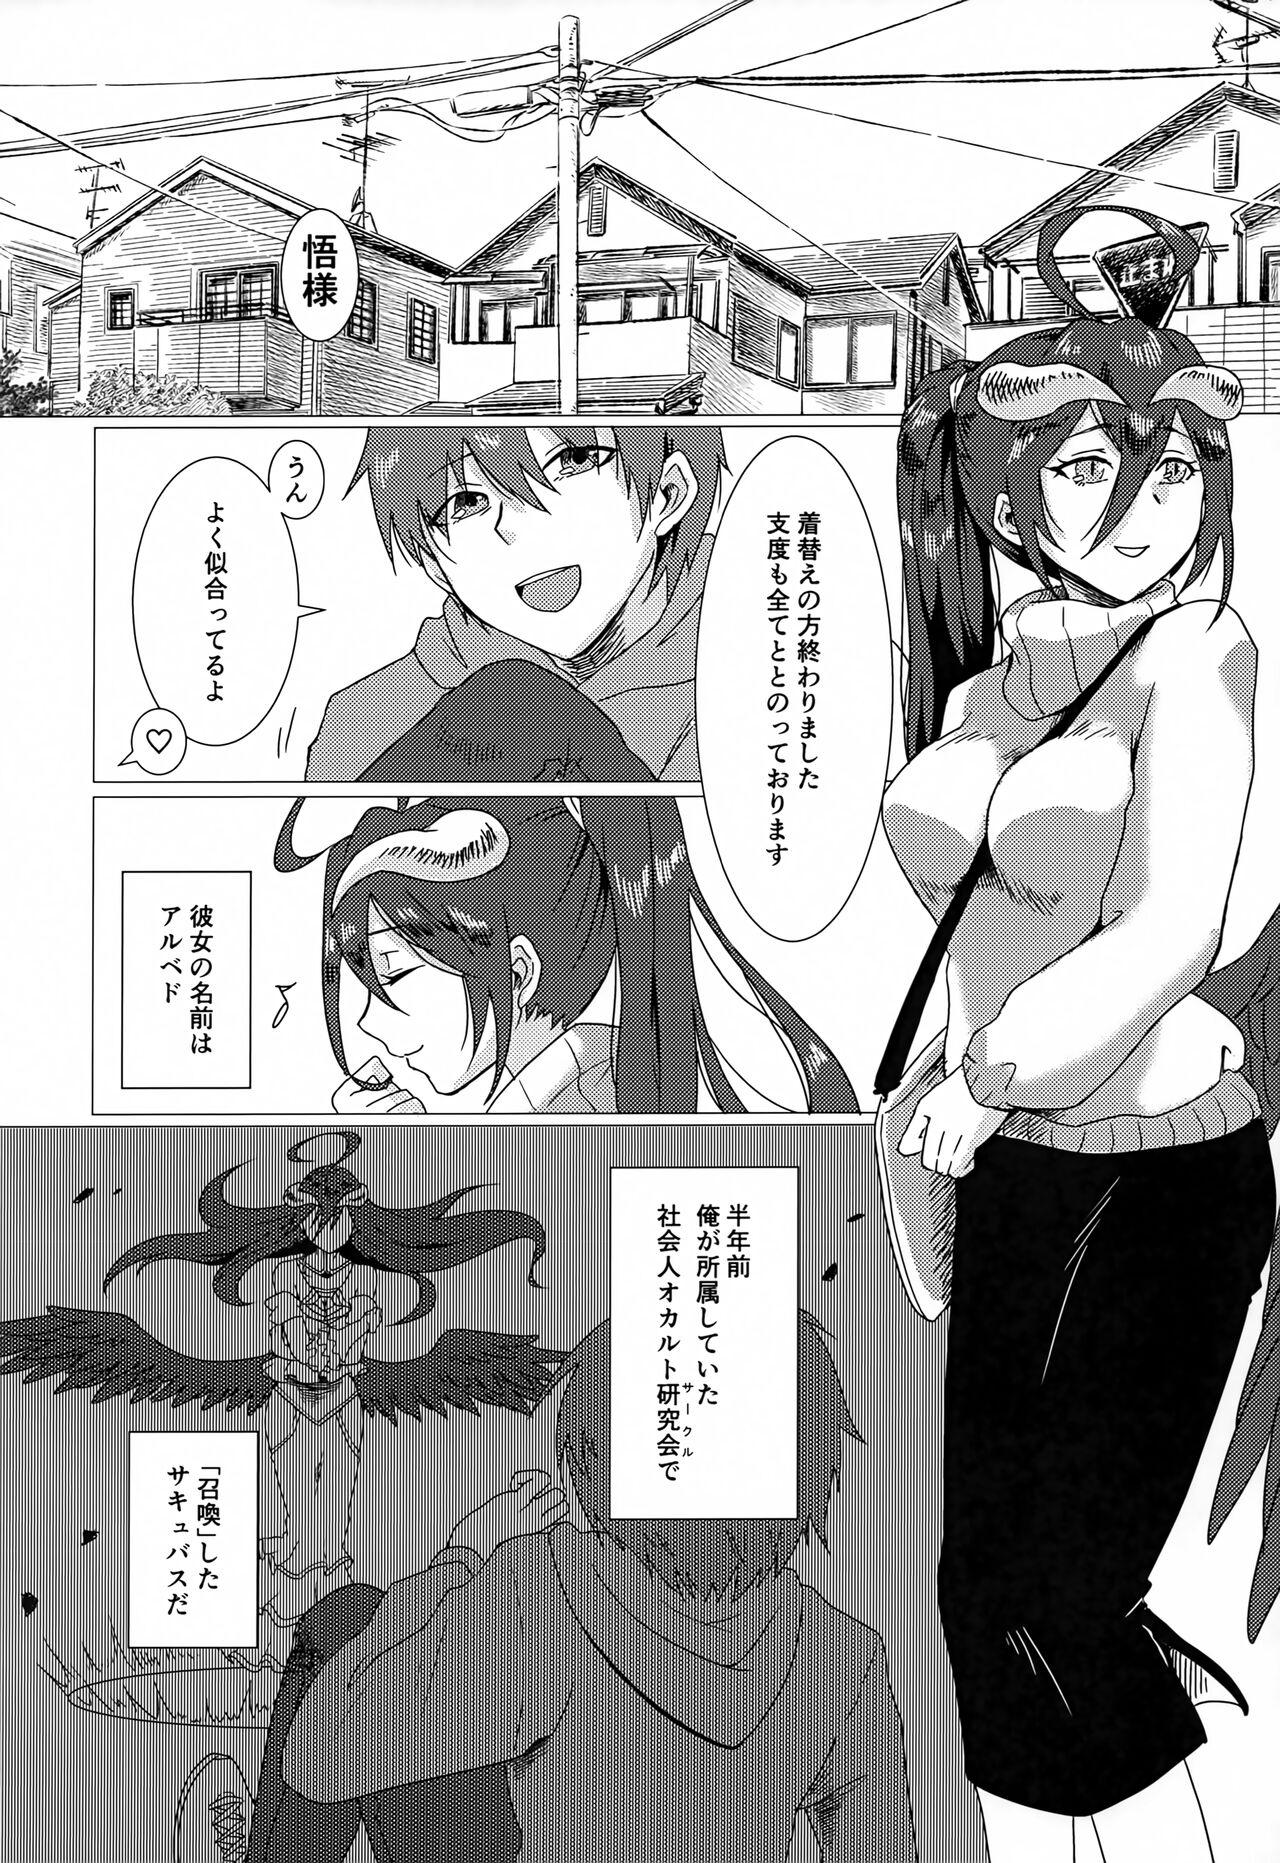 Teen Porn Albedo-san to! 2 - Overlord Story - Page 3